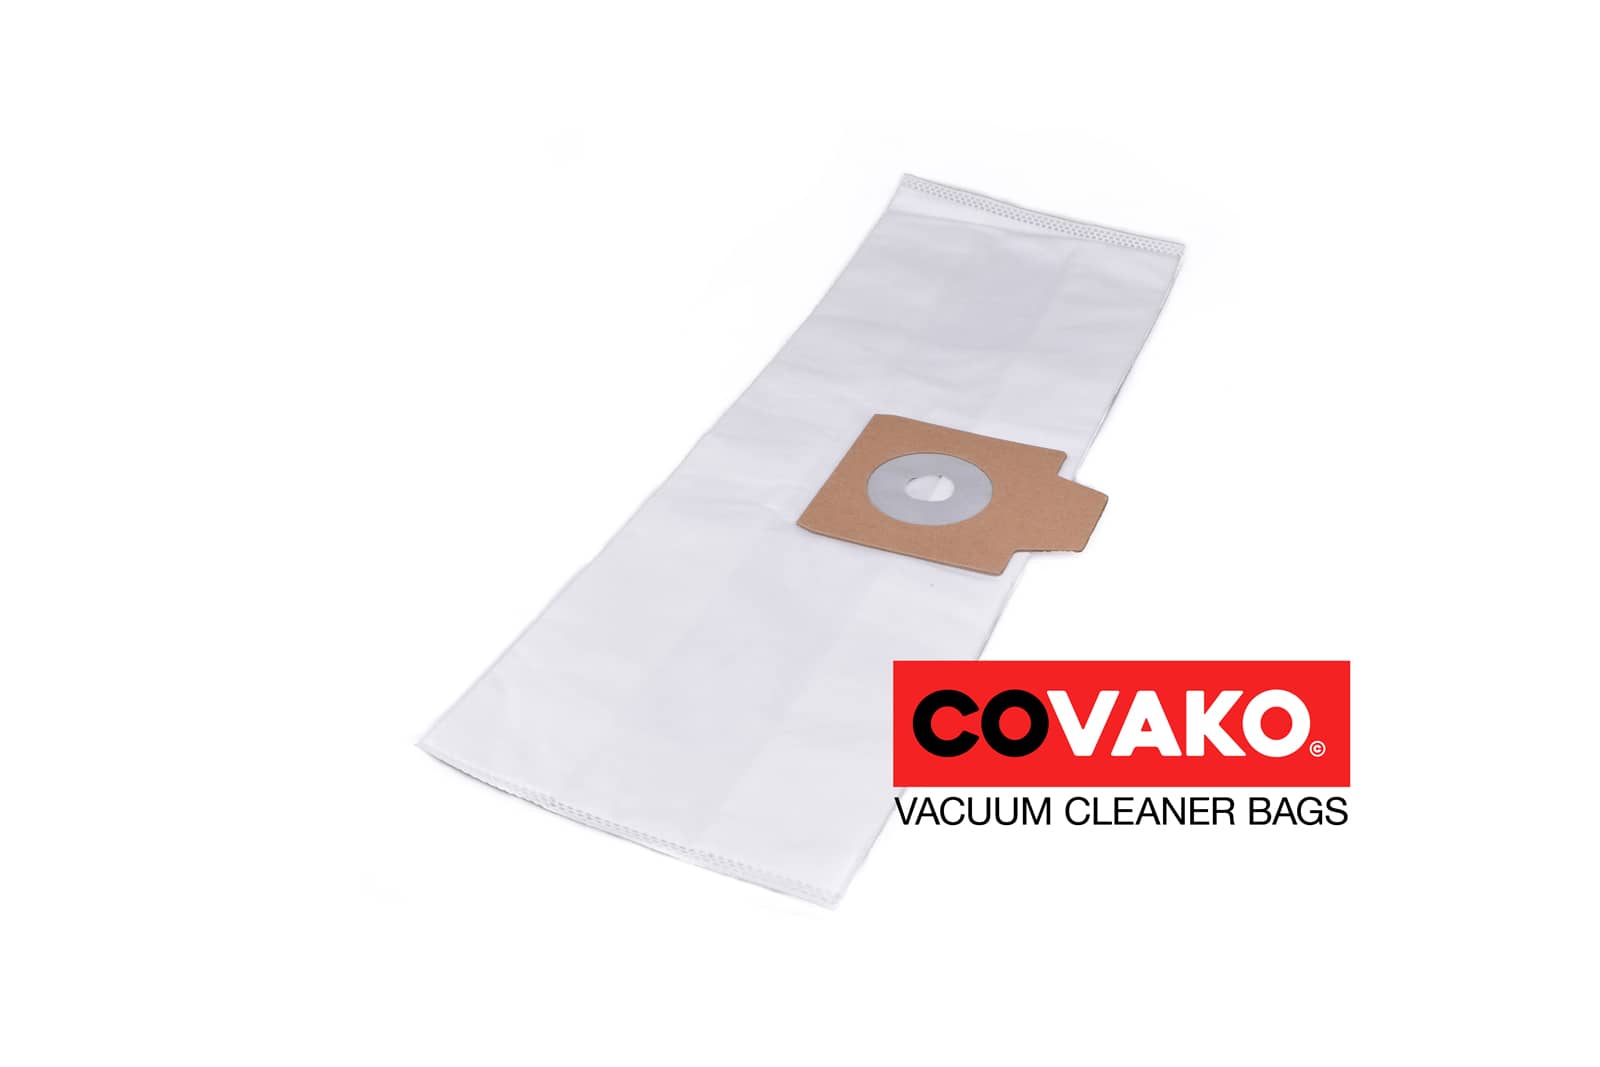 Electrolux UZ 932 / Synthesis - Electrolux vacuum cleaner bags